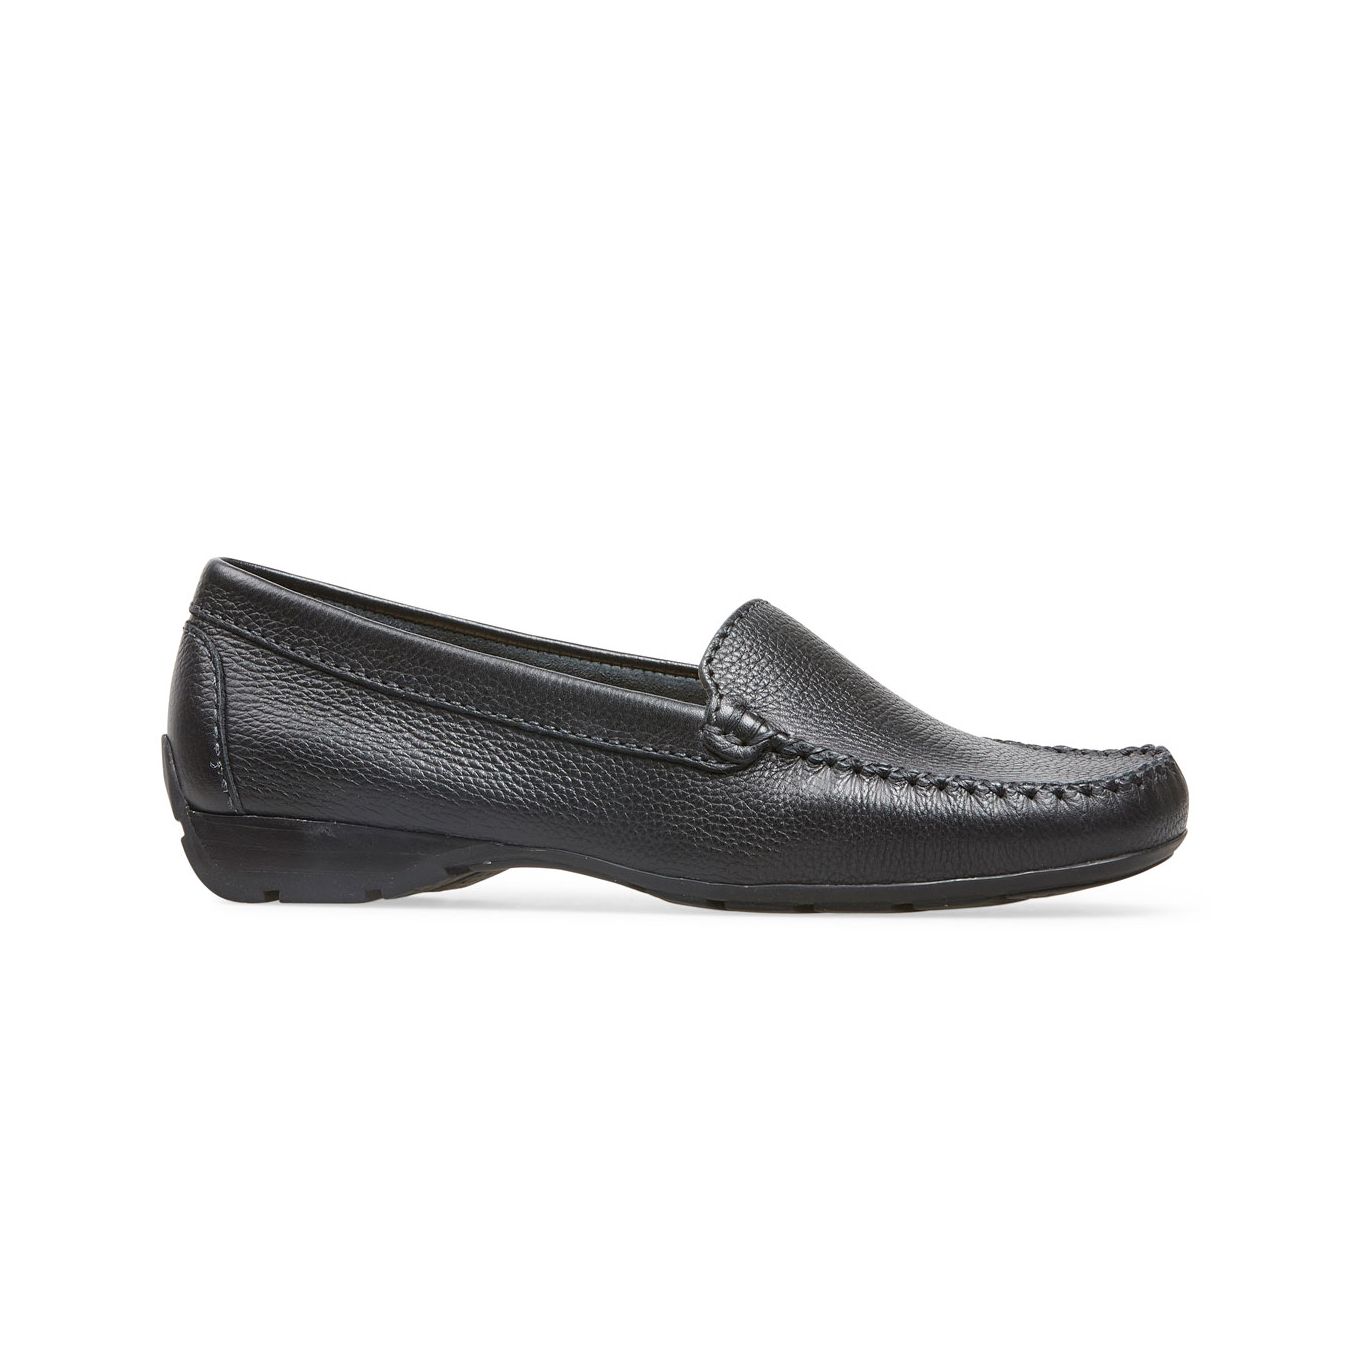 Van Dal Shoes - Sanson Loafers in Black Leather